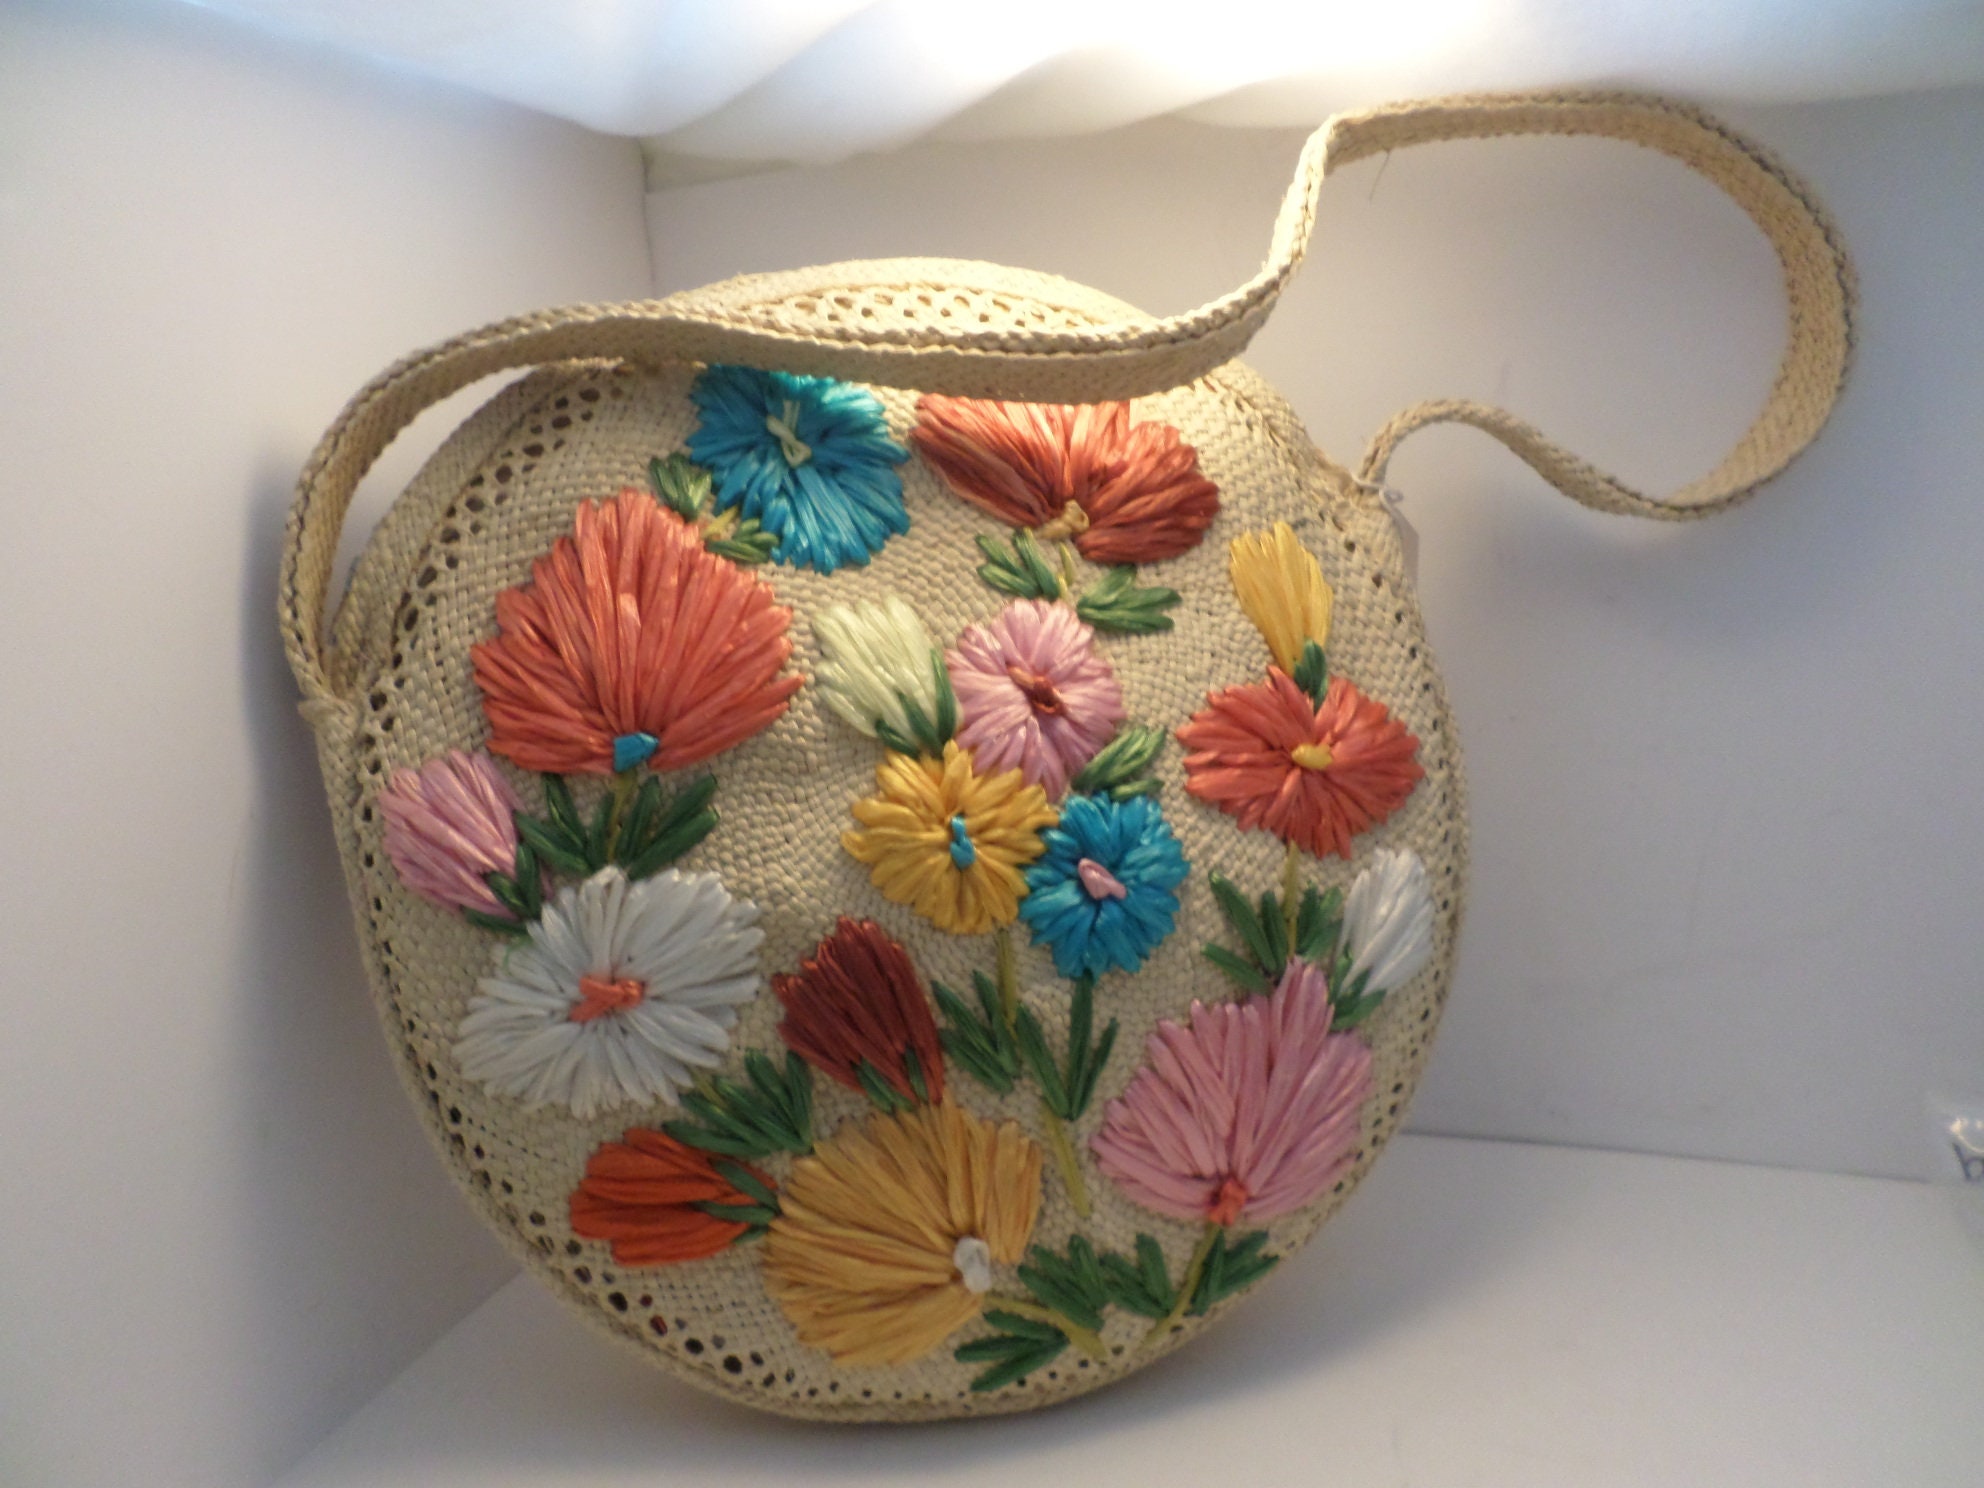 Vintage straw circle floral purse round shoulderbag vibrant flowers new ...